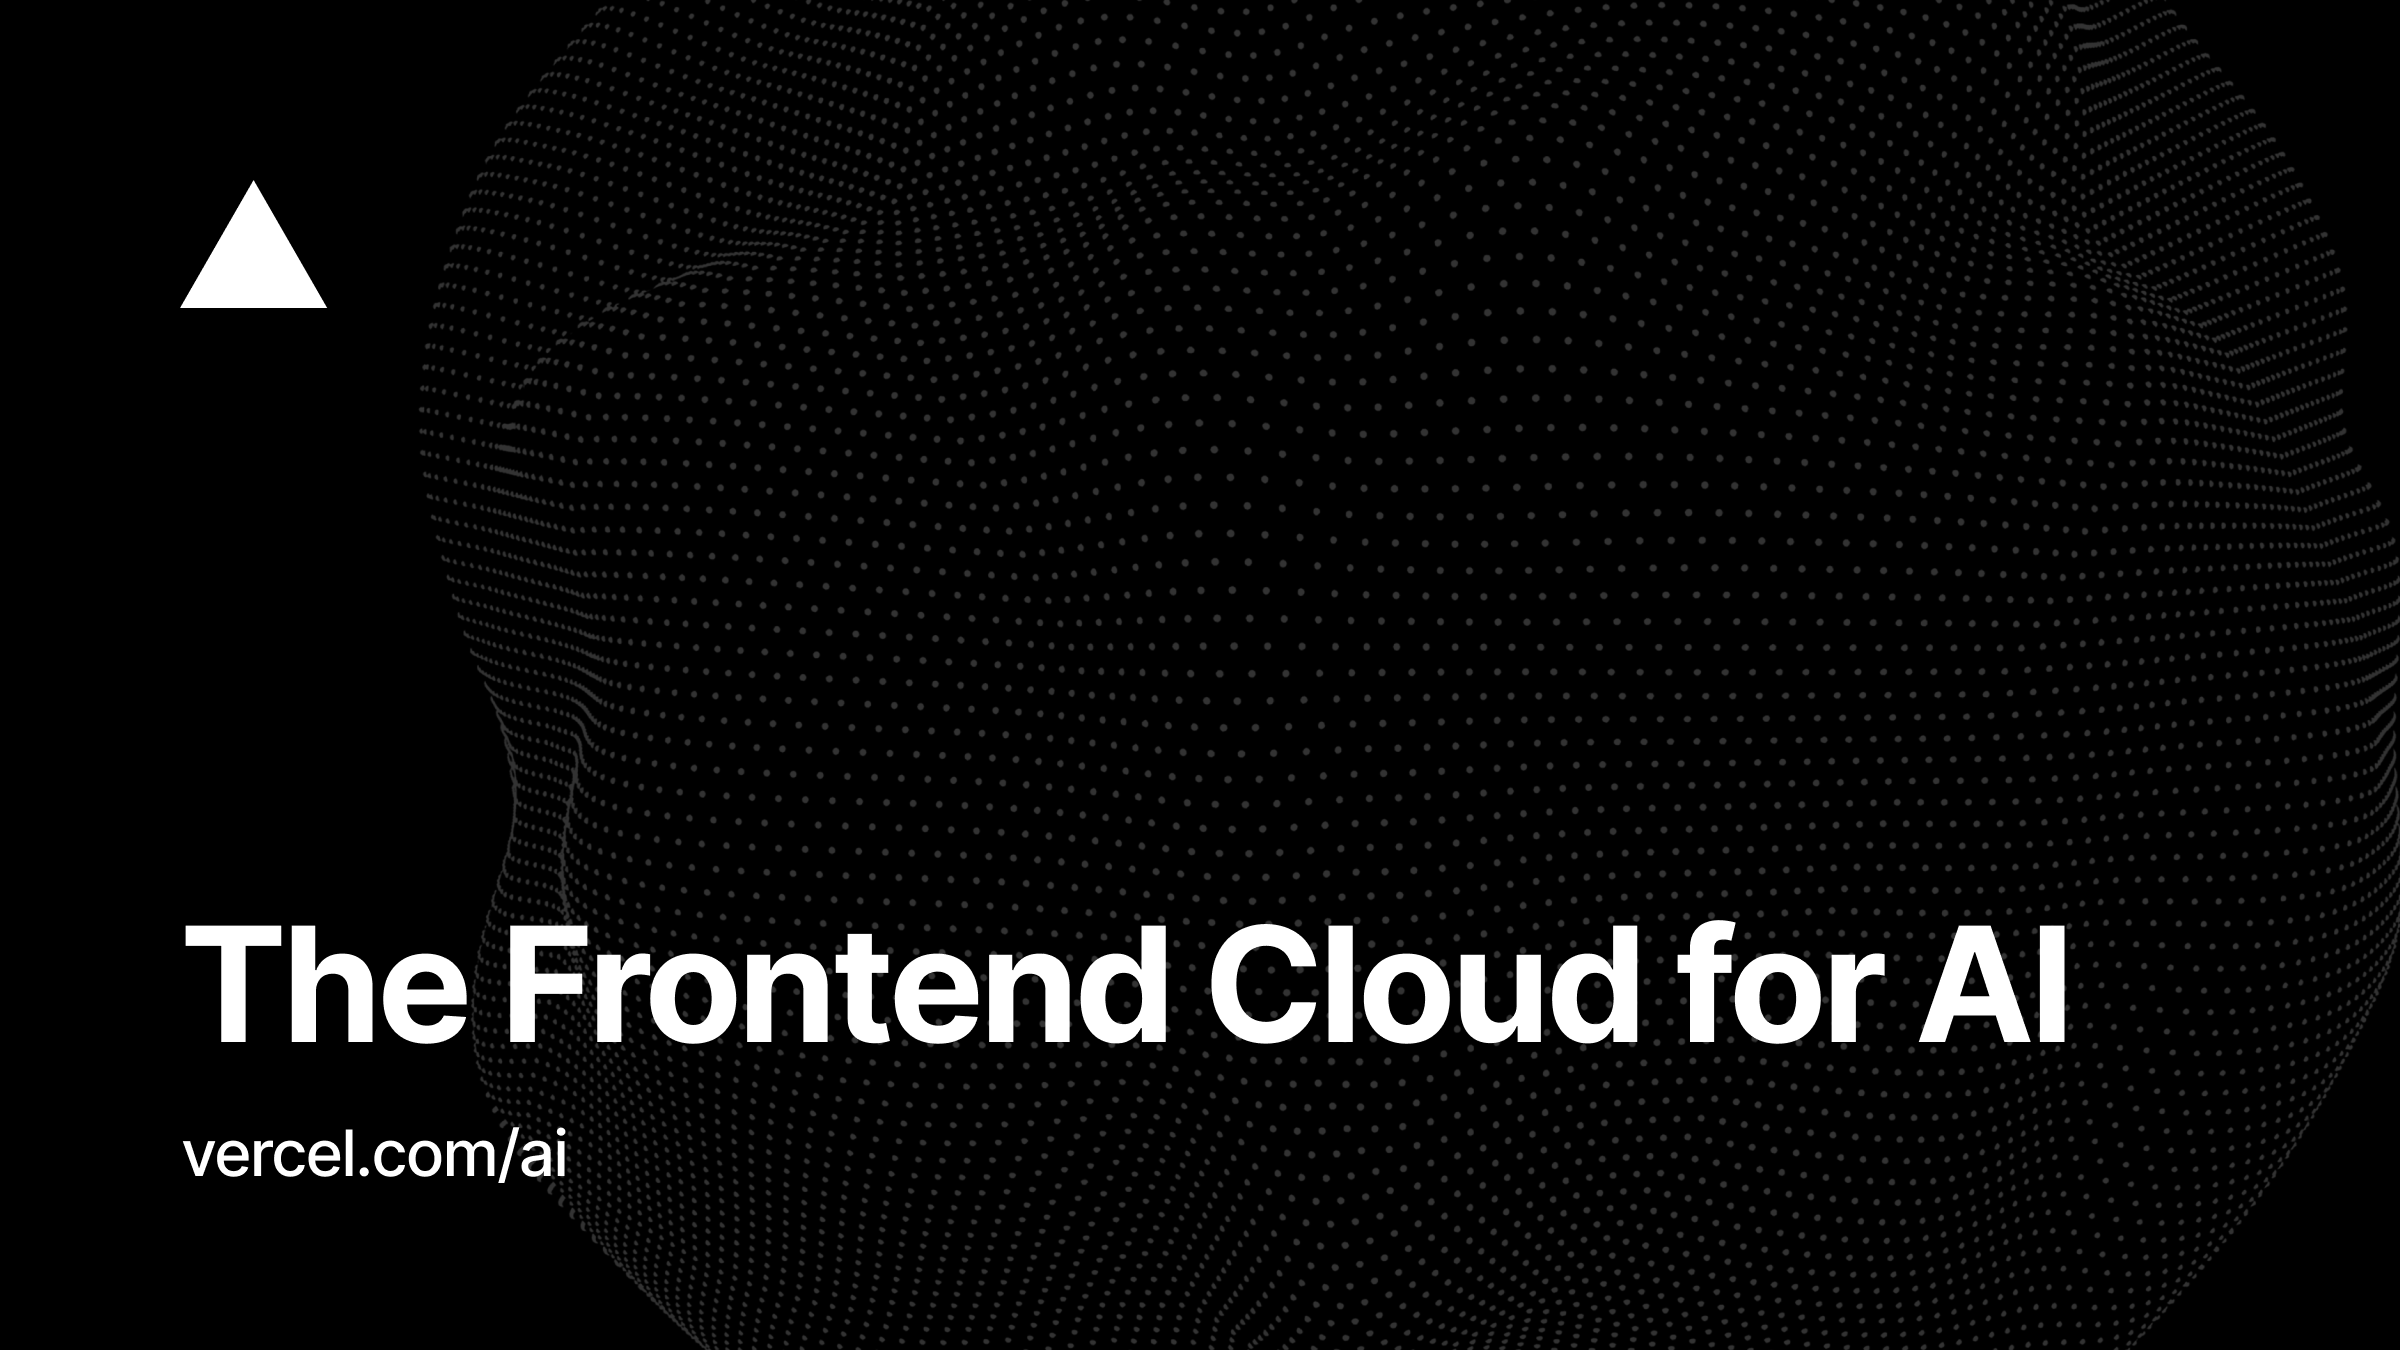 Deploy AI at the speed of frontend – Vercel